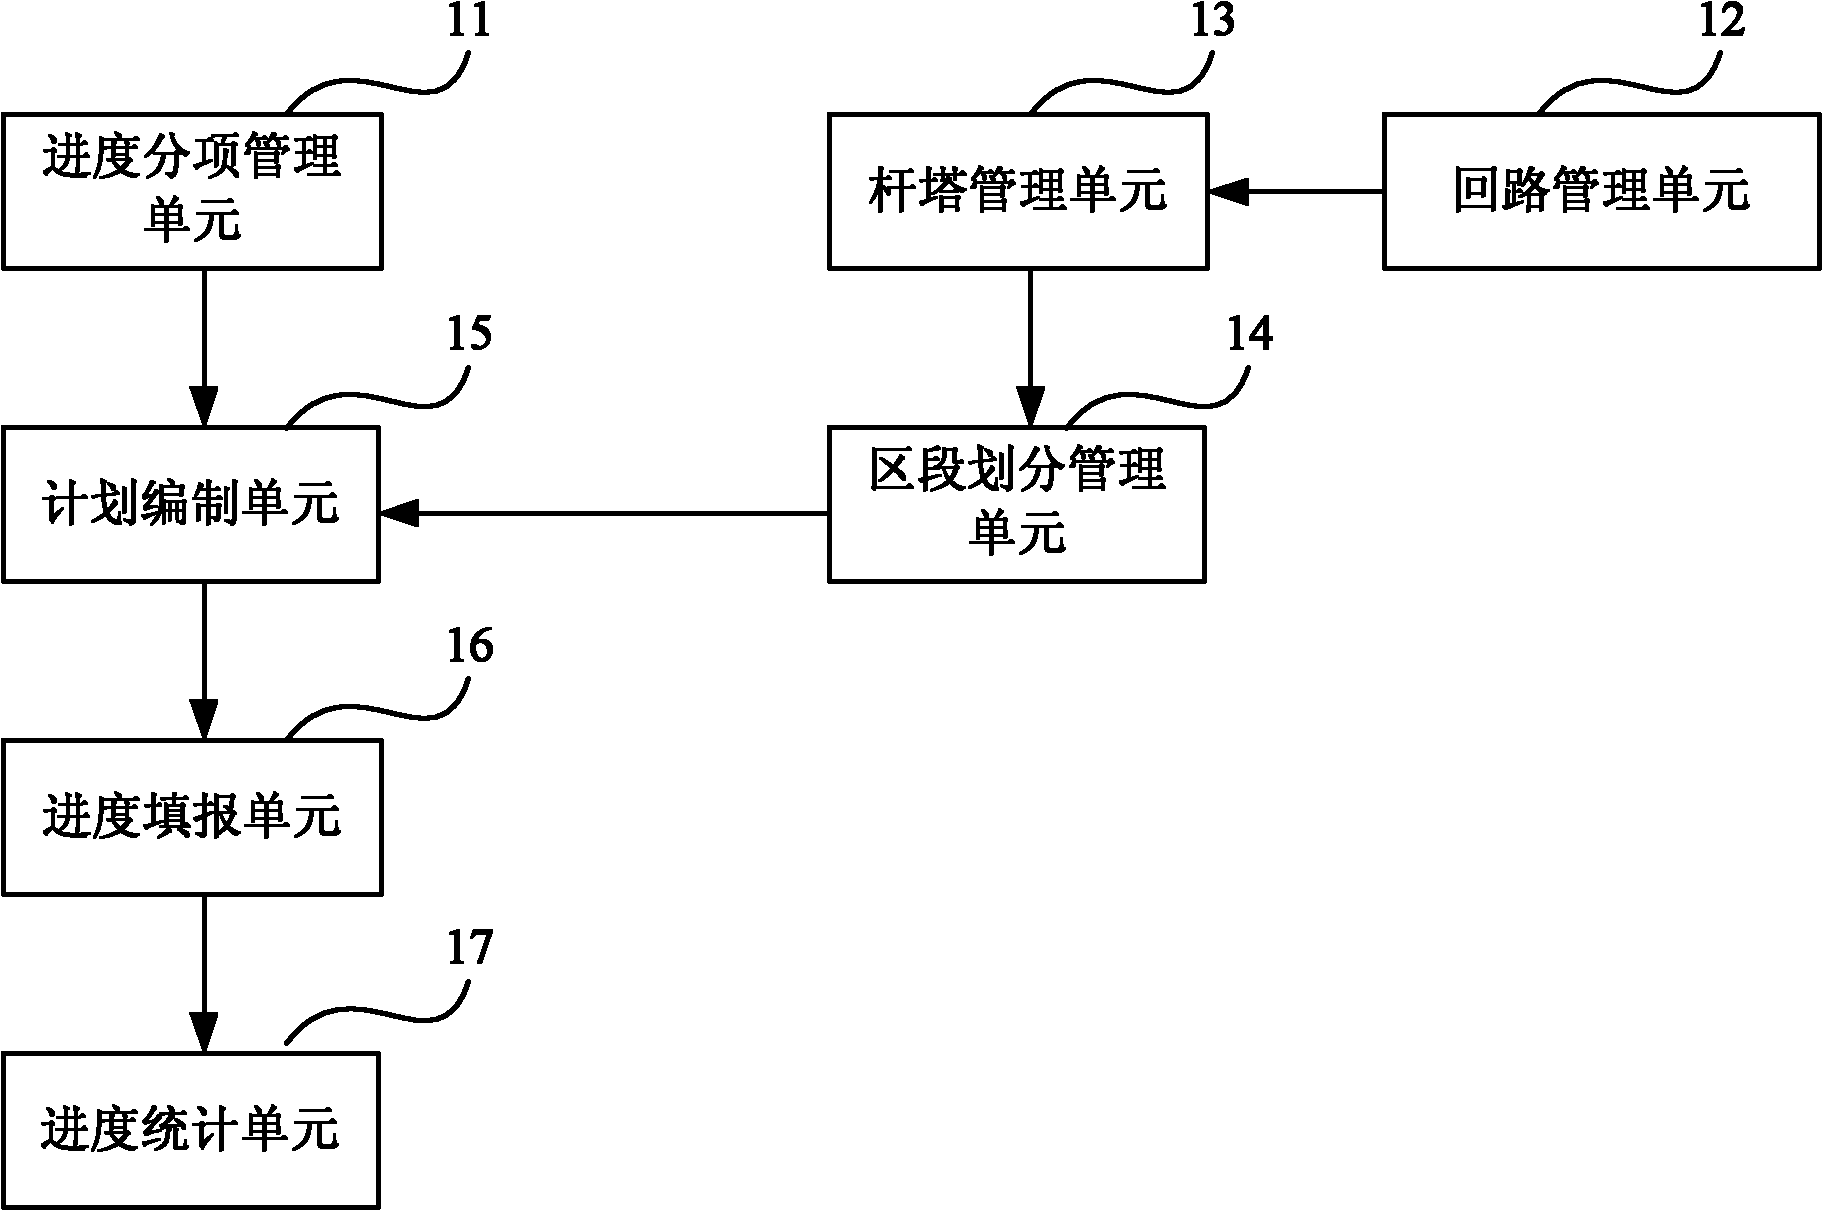 Power transmission and transformation project schedule management system and method for power system